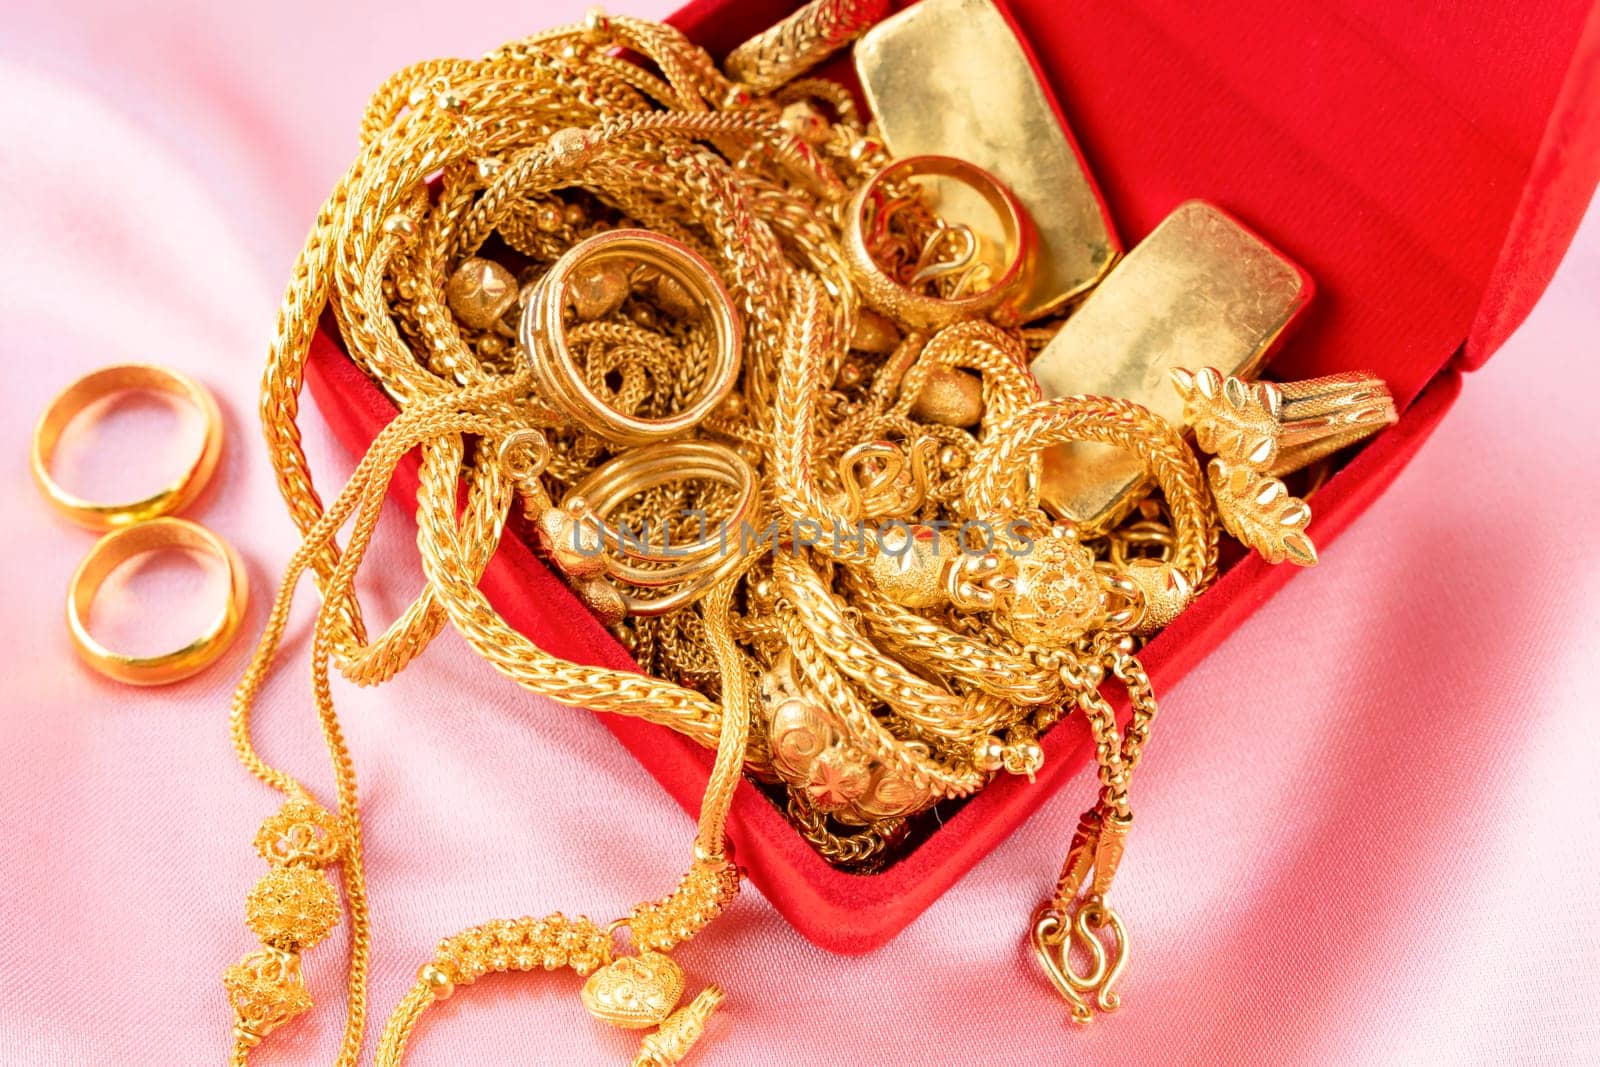 Many gold necklaces and gold bars in red box on velvet cloth. by Gamjai